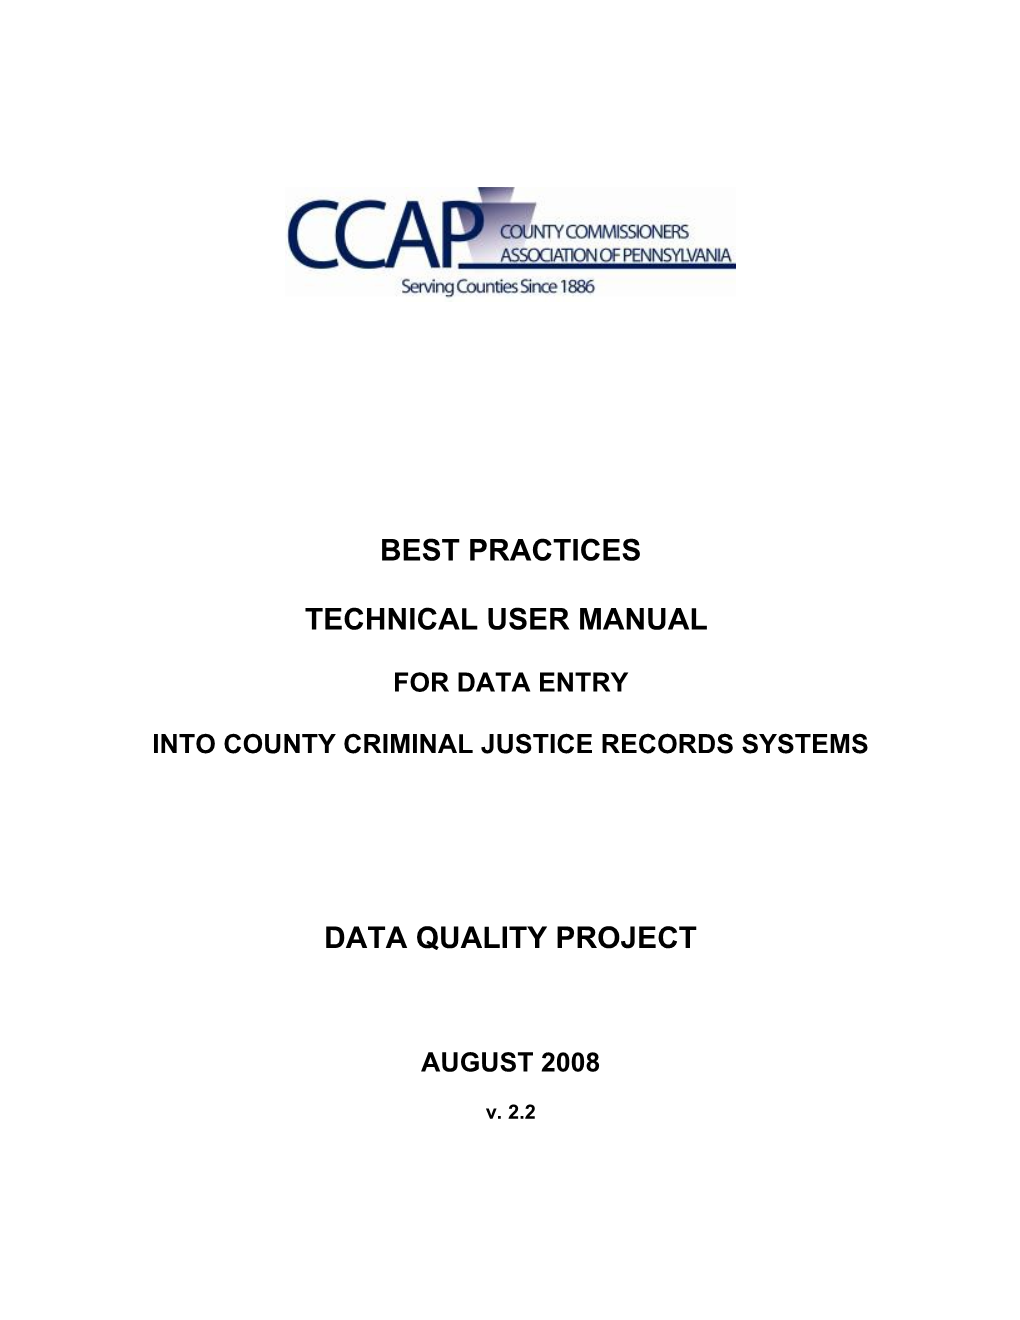 Into County Criminal Justice Records Systems